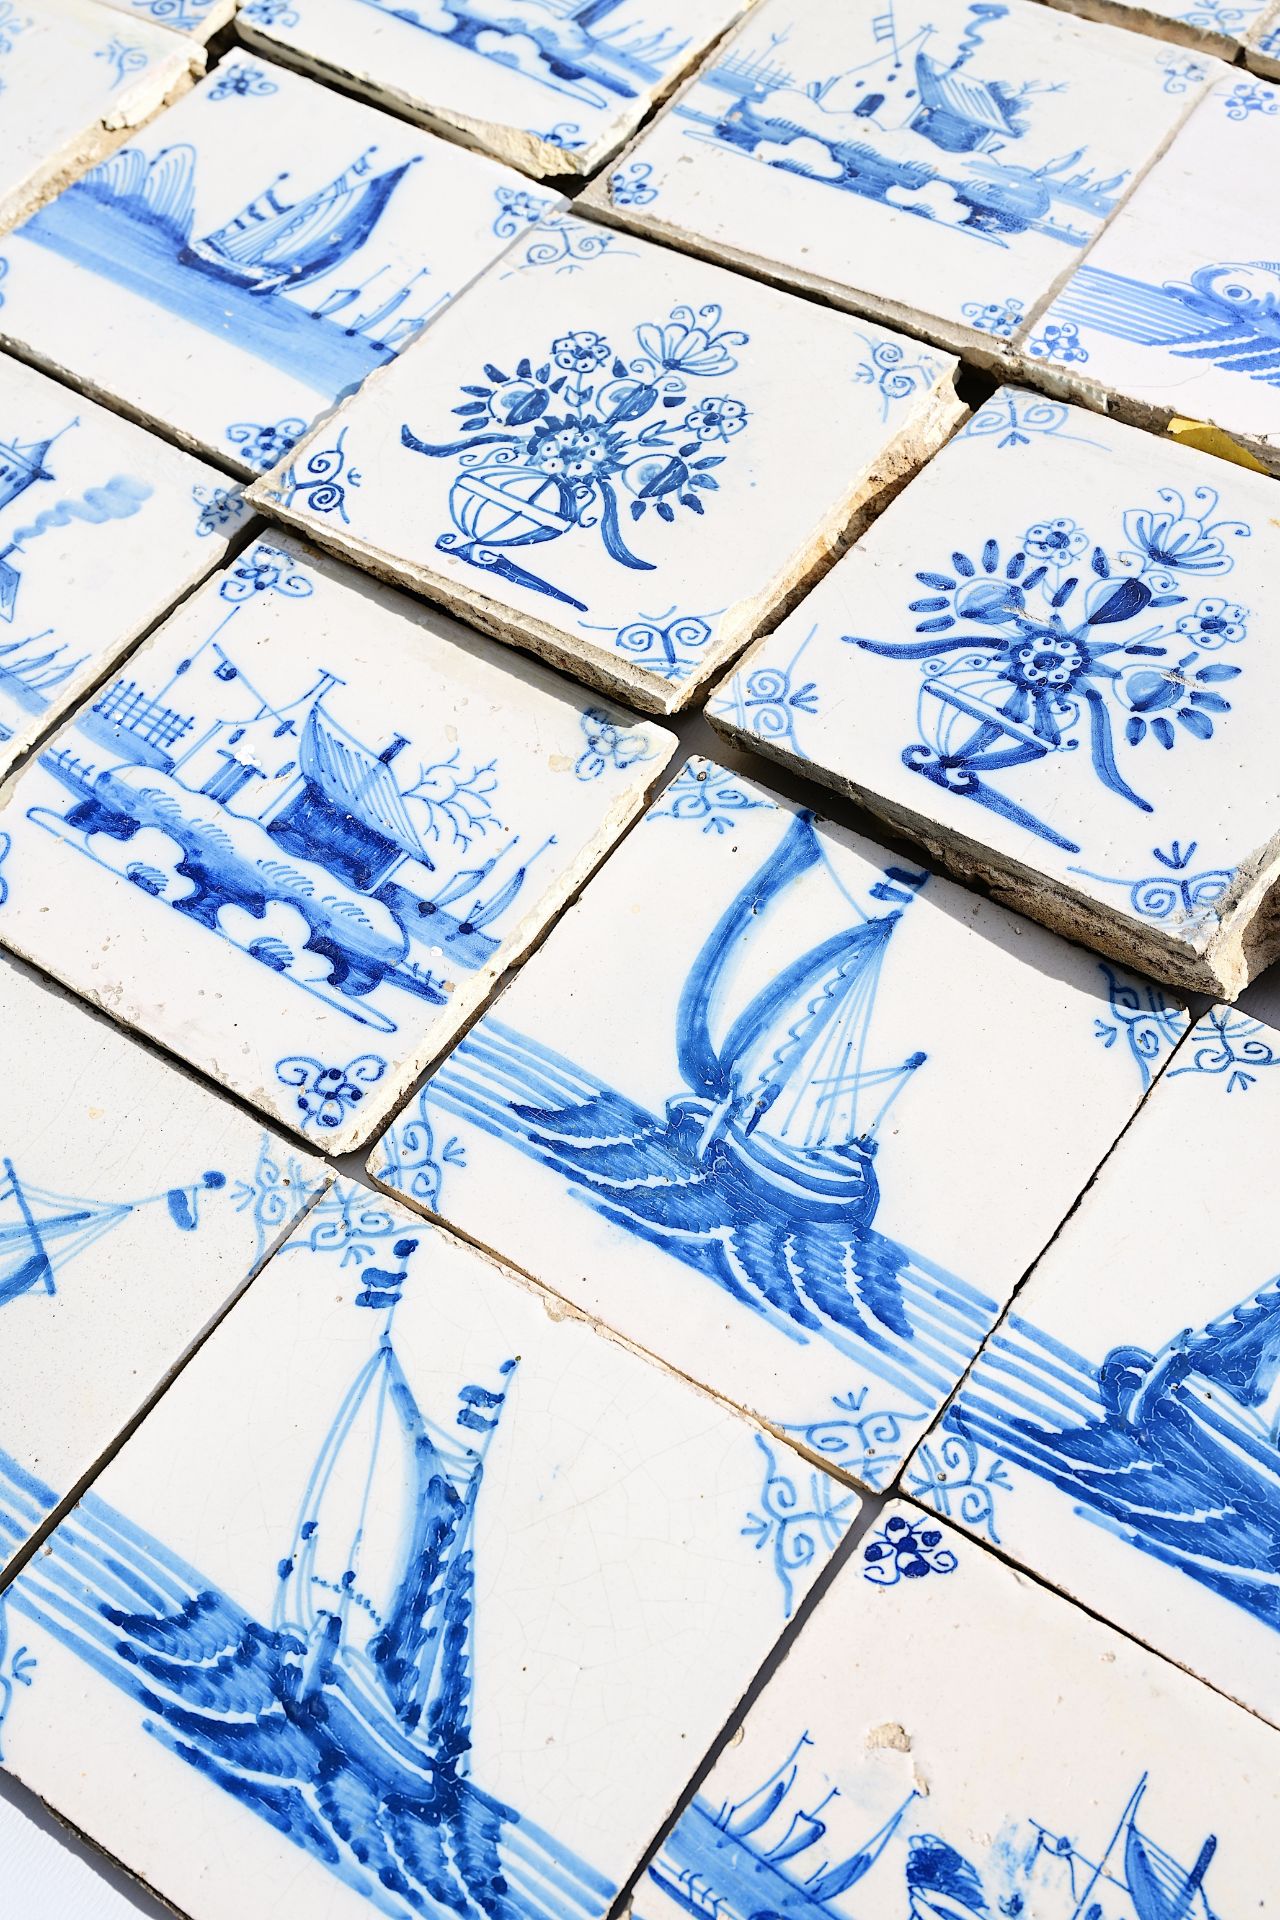 A varied collection of Dutch Delft blue and white tiles with flowers, boats, animals, sea monsters a - Image 3 of 3